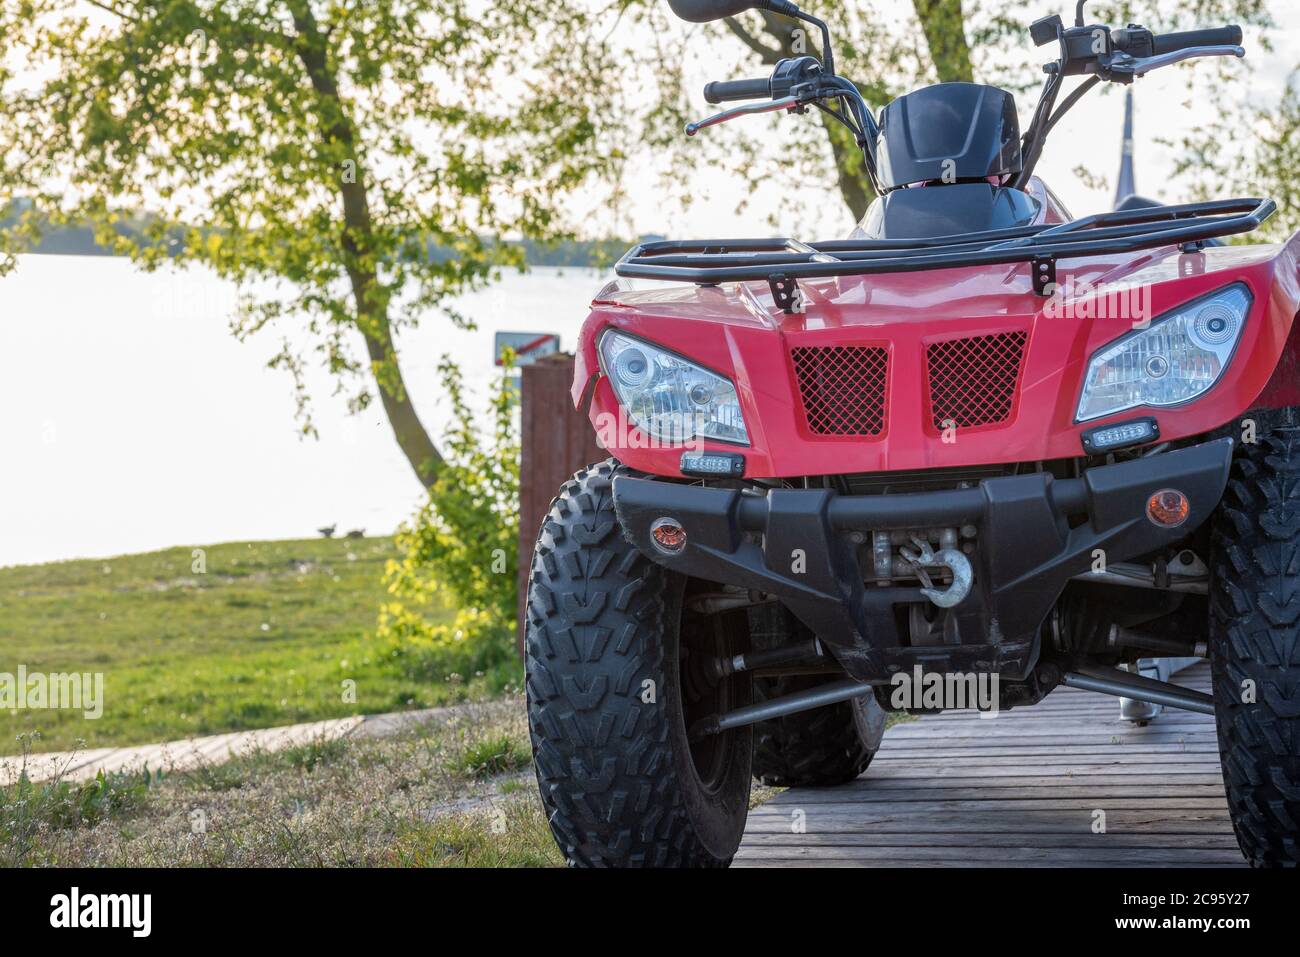 ATV, all terrain vehicle, red quad bike parked in countryside for off road adventures and travelling Stock Photo